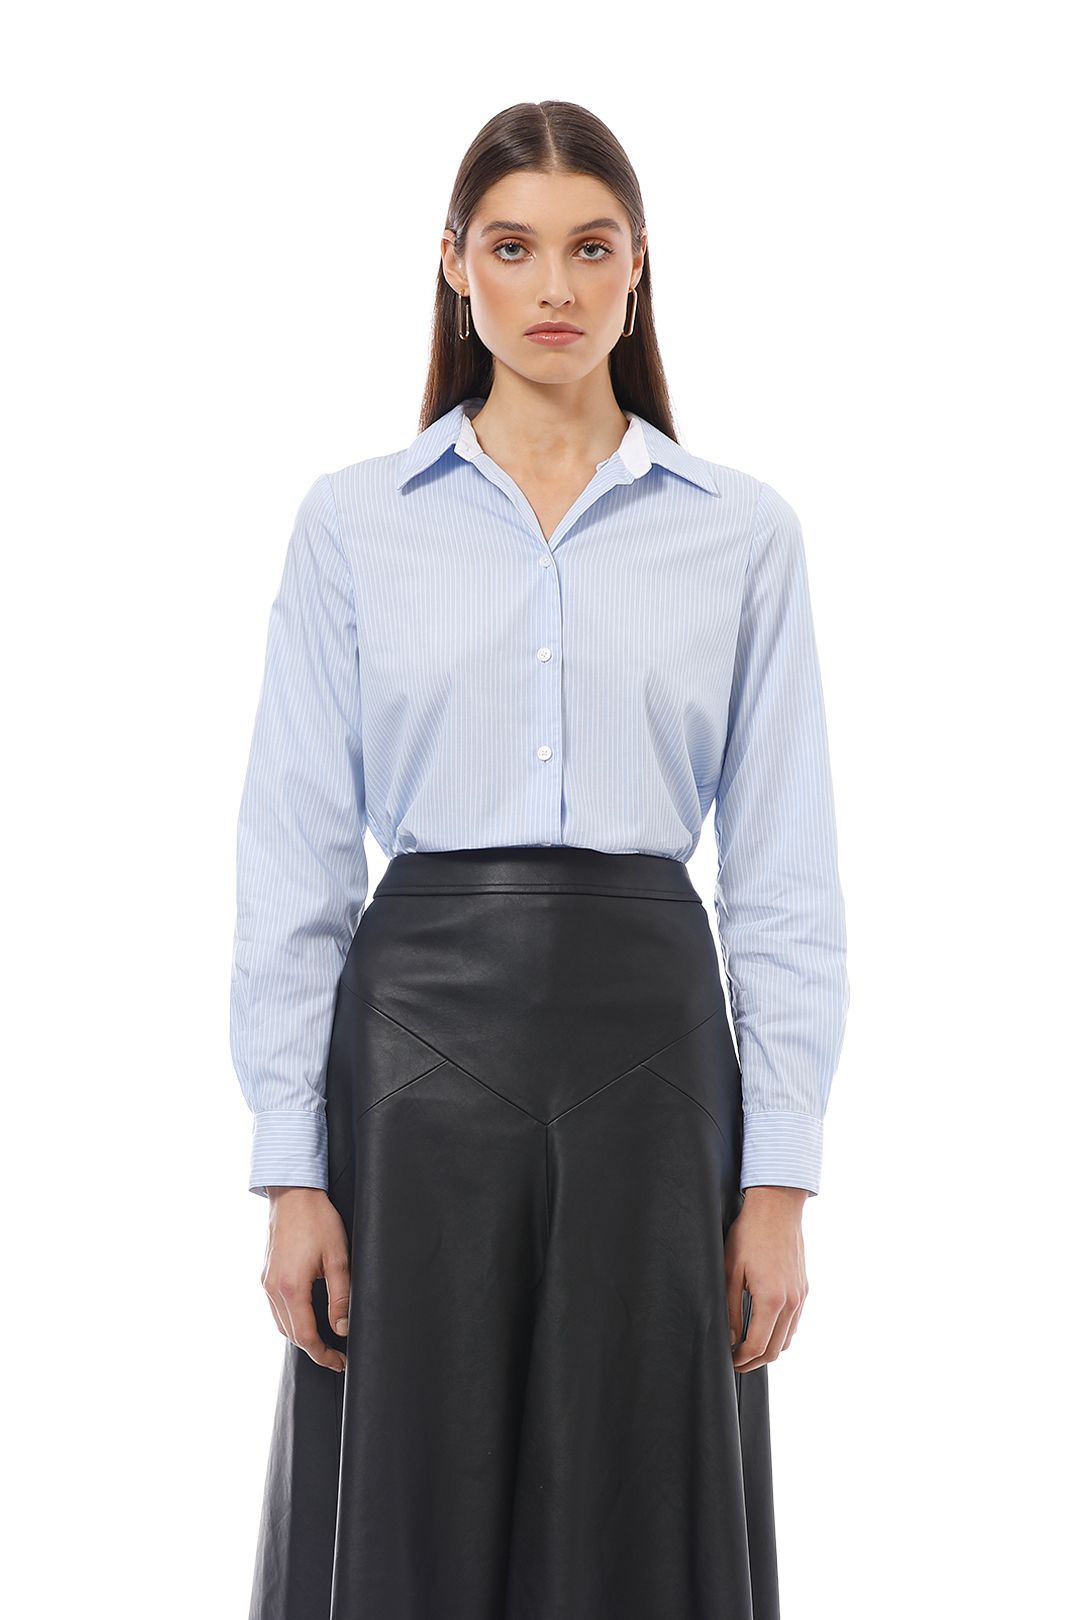 Saba - Ivy Semi-Fitted Shirt - Blue - Close Up